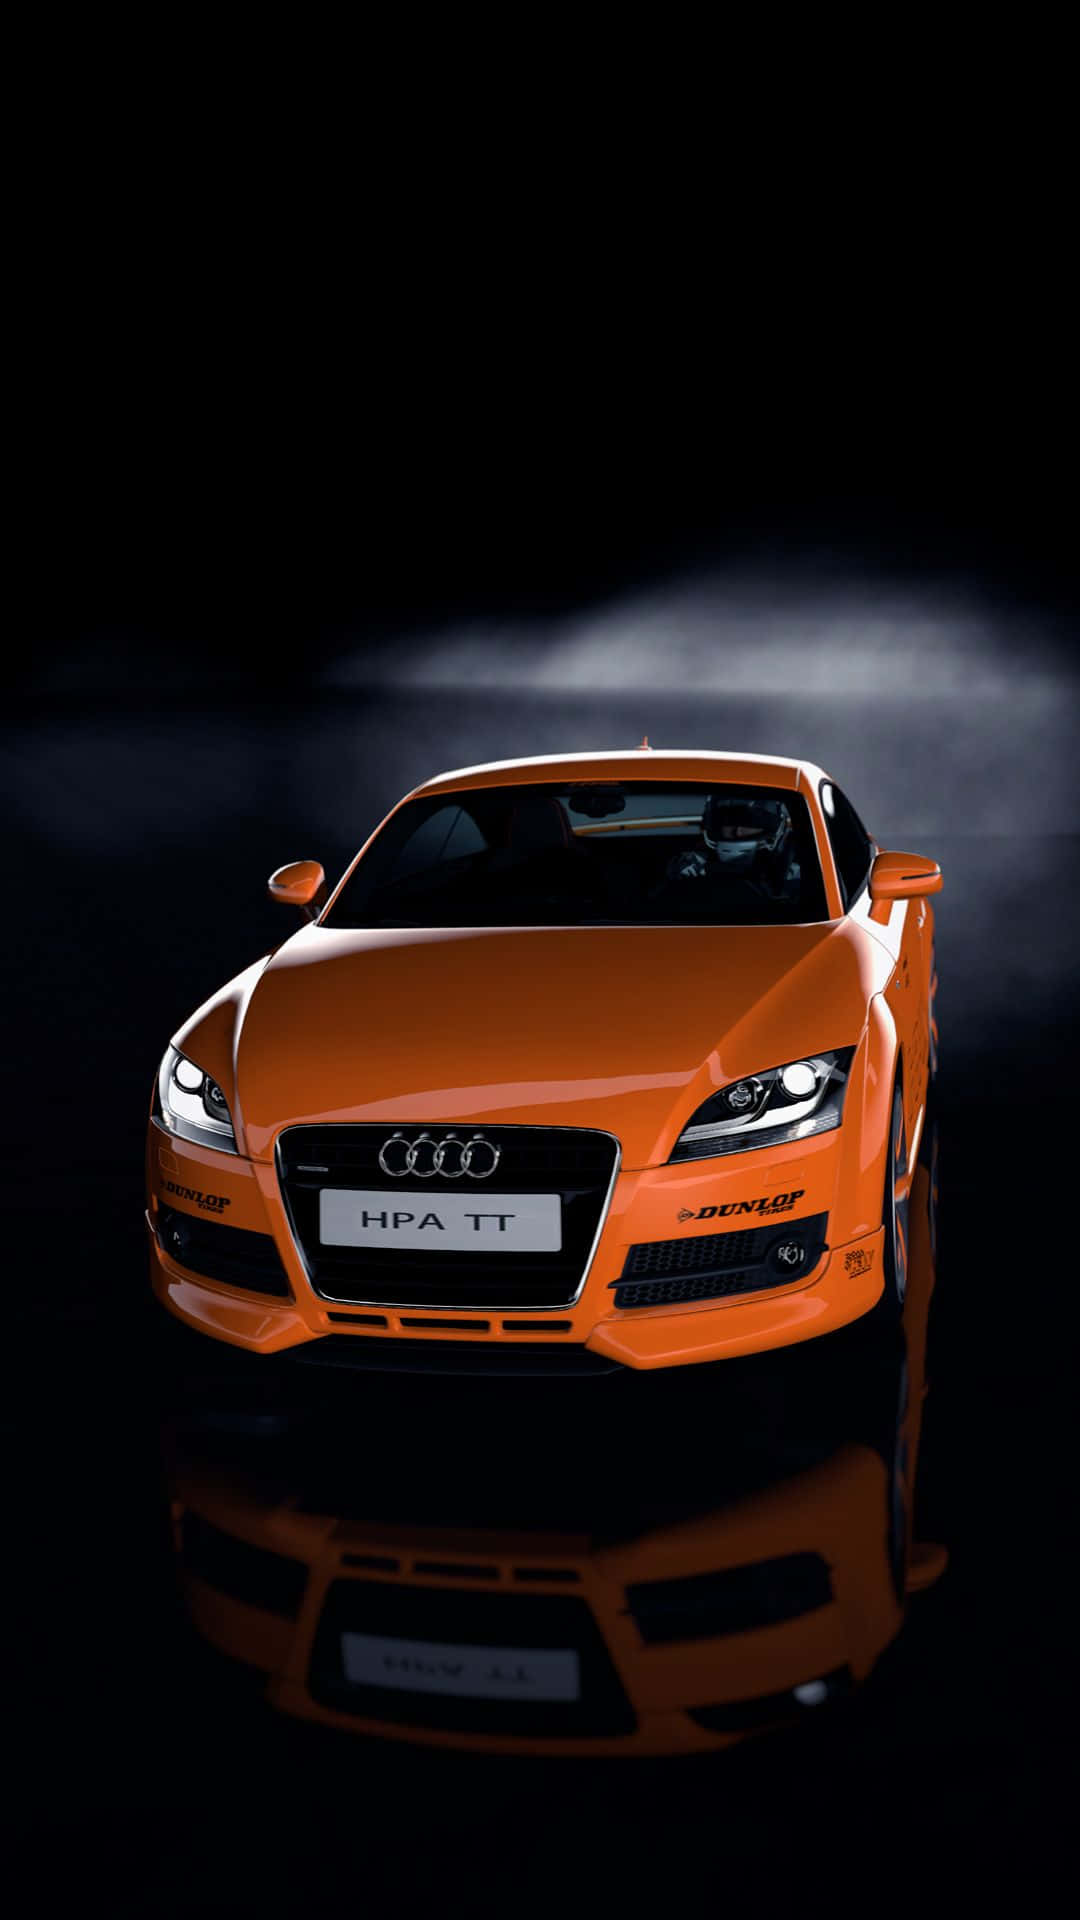 Captivating Audi TT in Majestic Mountains Wallpaper